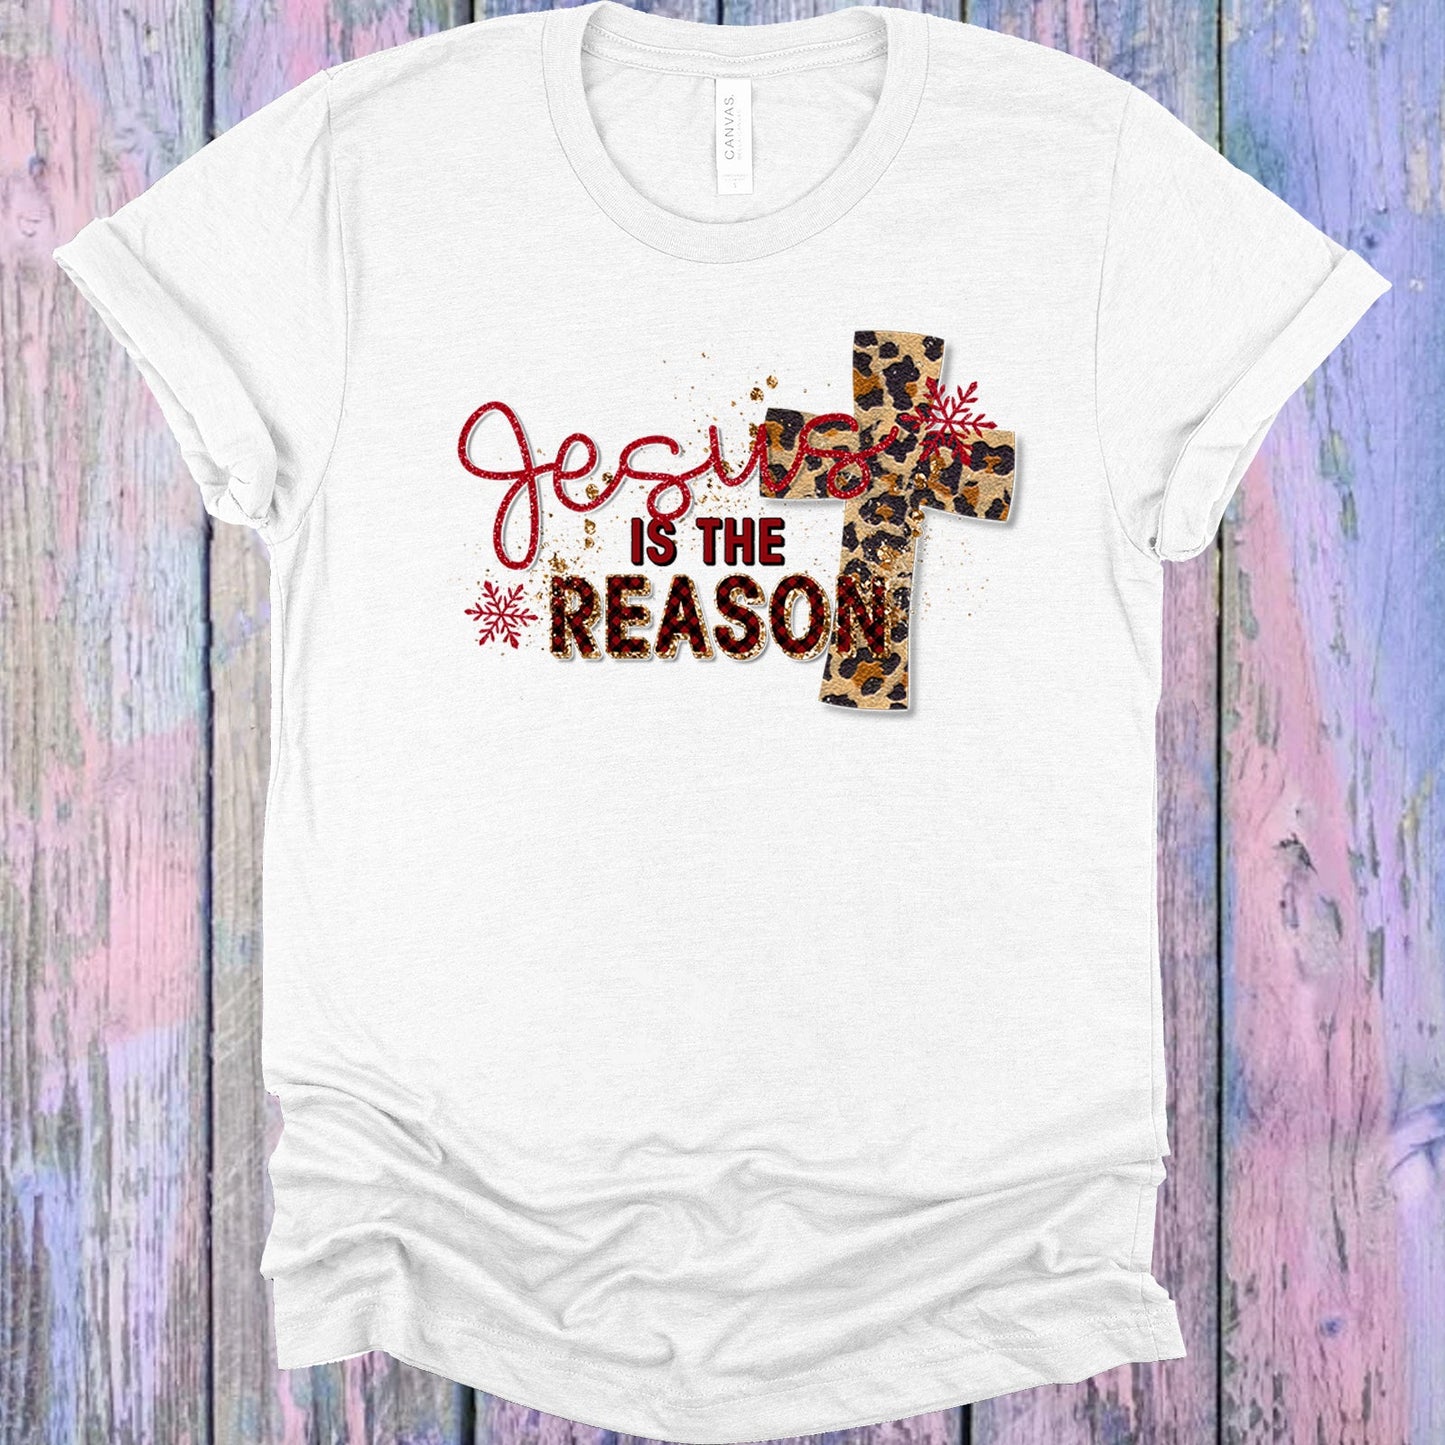 Jesus Is The Reason Graphic Tee Graphic Tee